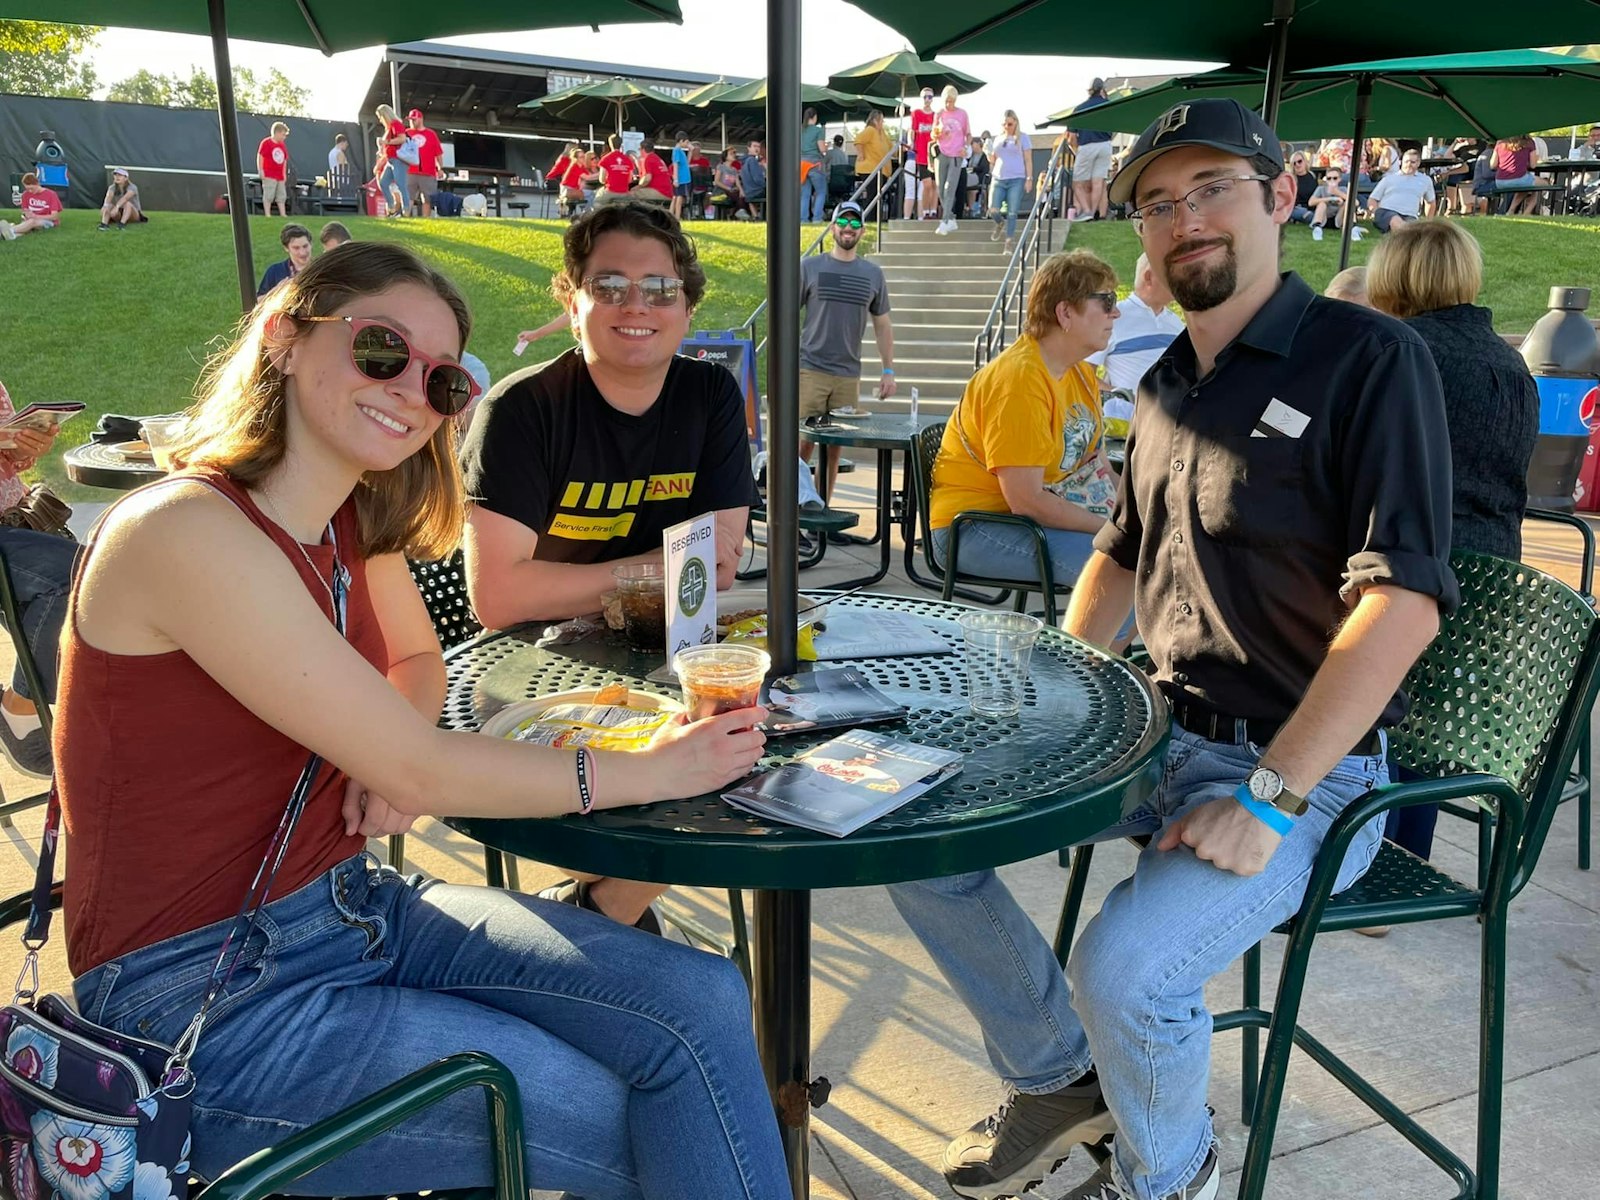 Members of St. Kieran Parish in Shelby Township participate in "Catholic Night" at Jimmy John's Field in Utica. Parish outings can serve as low-barrier opportunities to invite lapsed or former parishioners back into the fold, Fr. Mallia said.